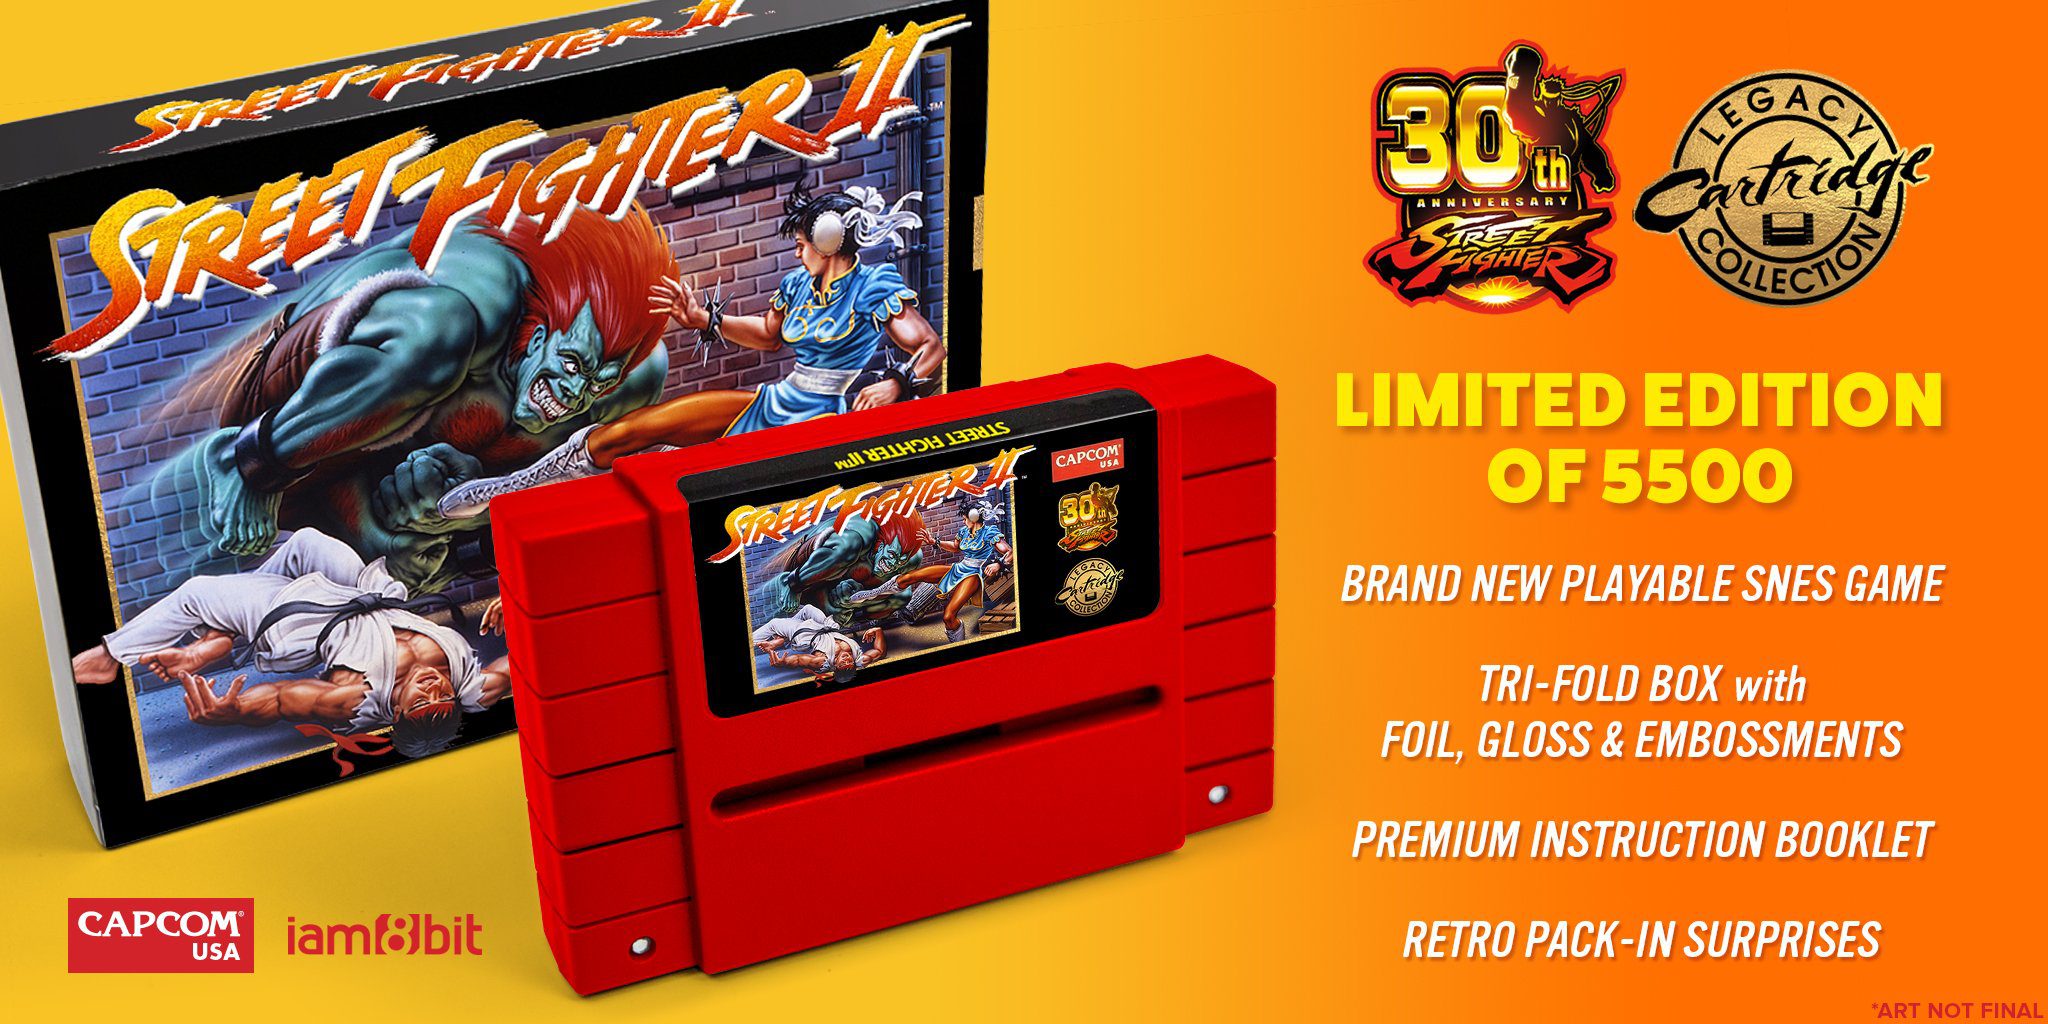 Street Fighter’s 30th Anniversary Limited Edition Street Fighter II Cartridge